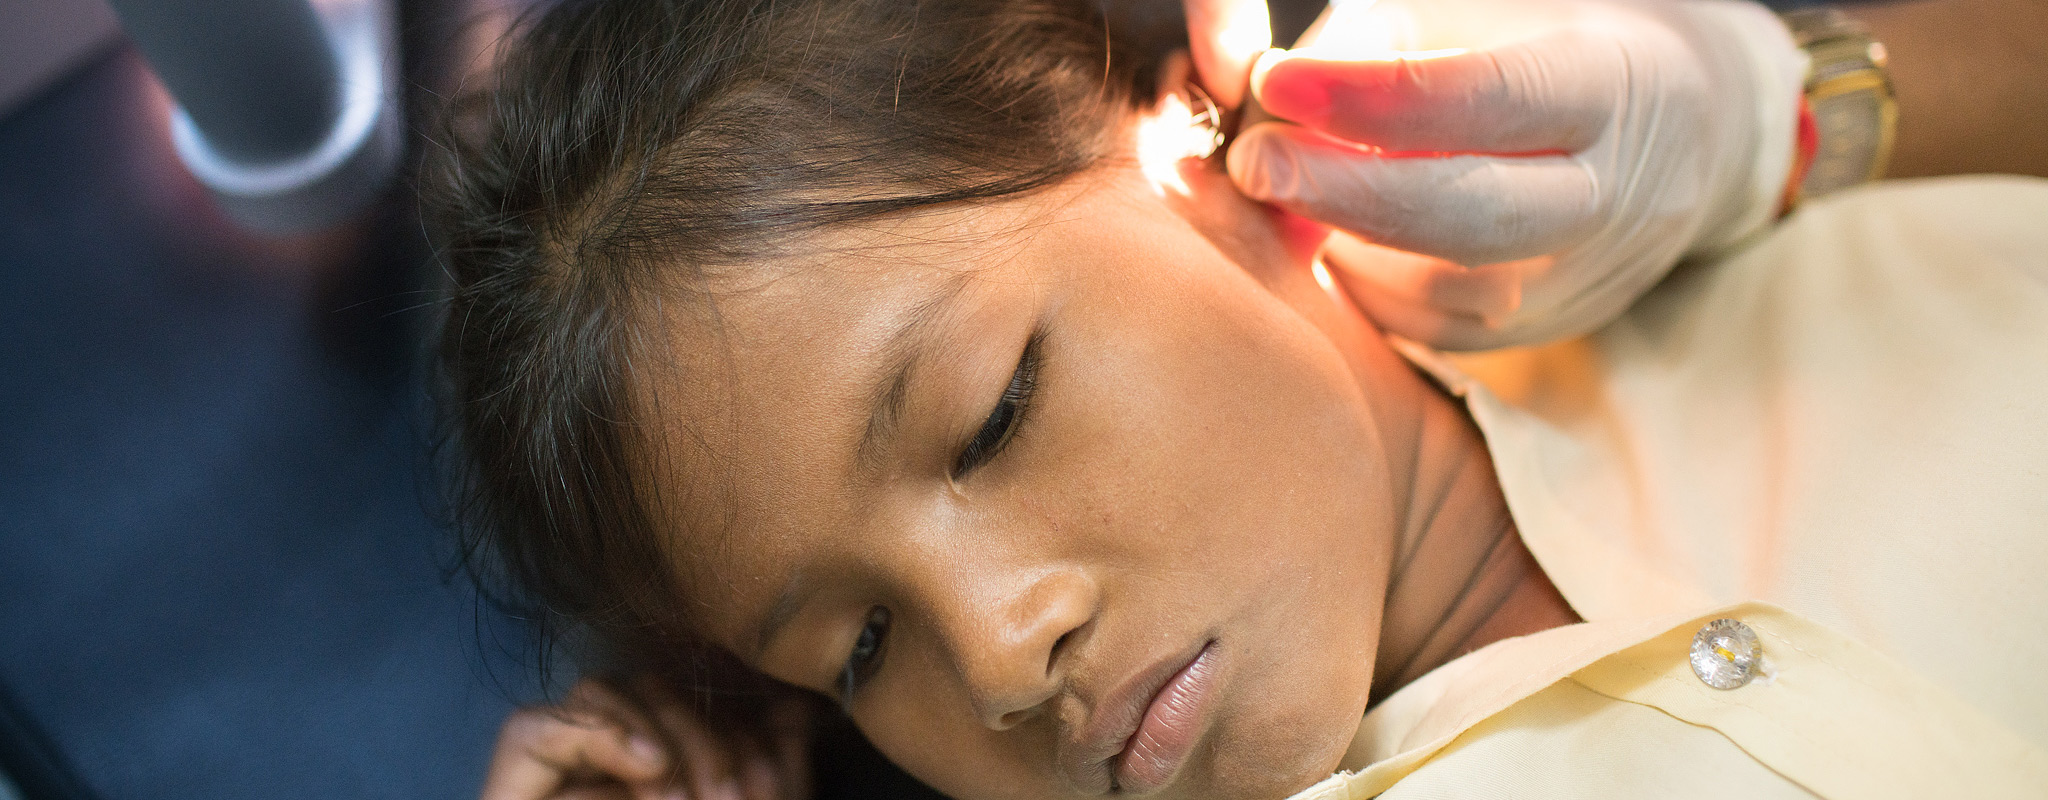 audiological-care-changing-22000-lives-every-year-Cambodia-Hear-the-World-Foundation-02